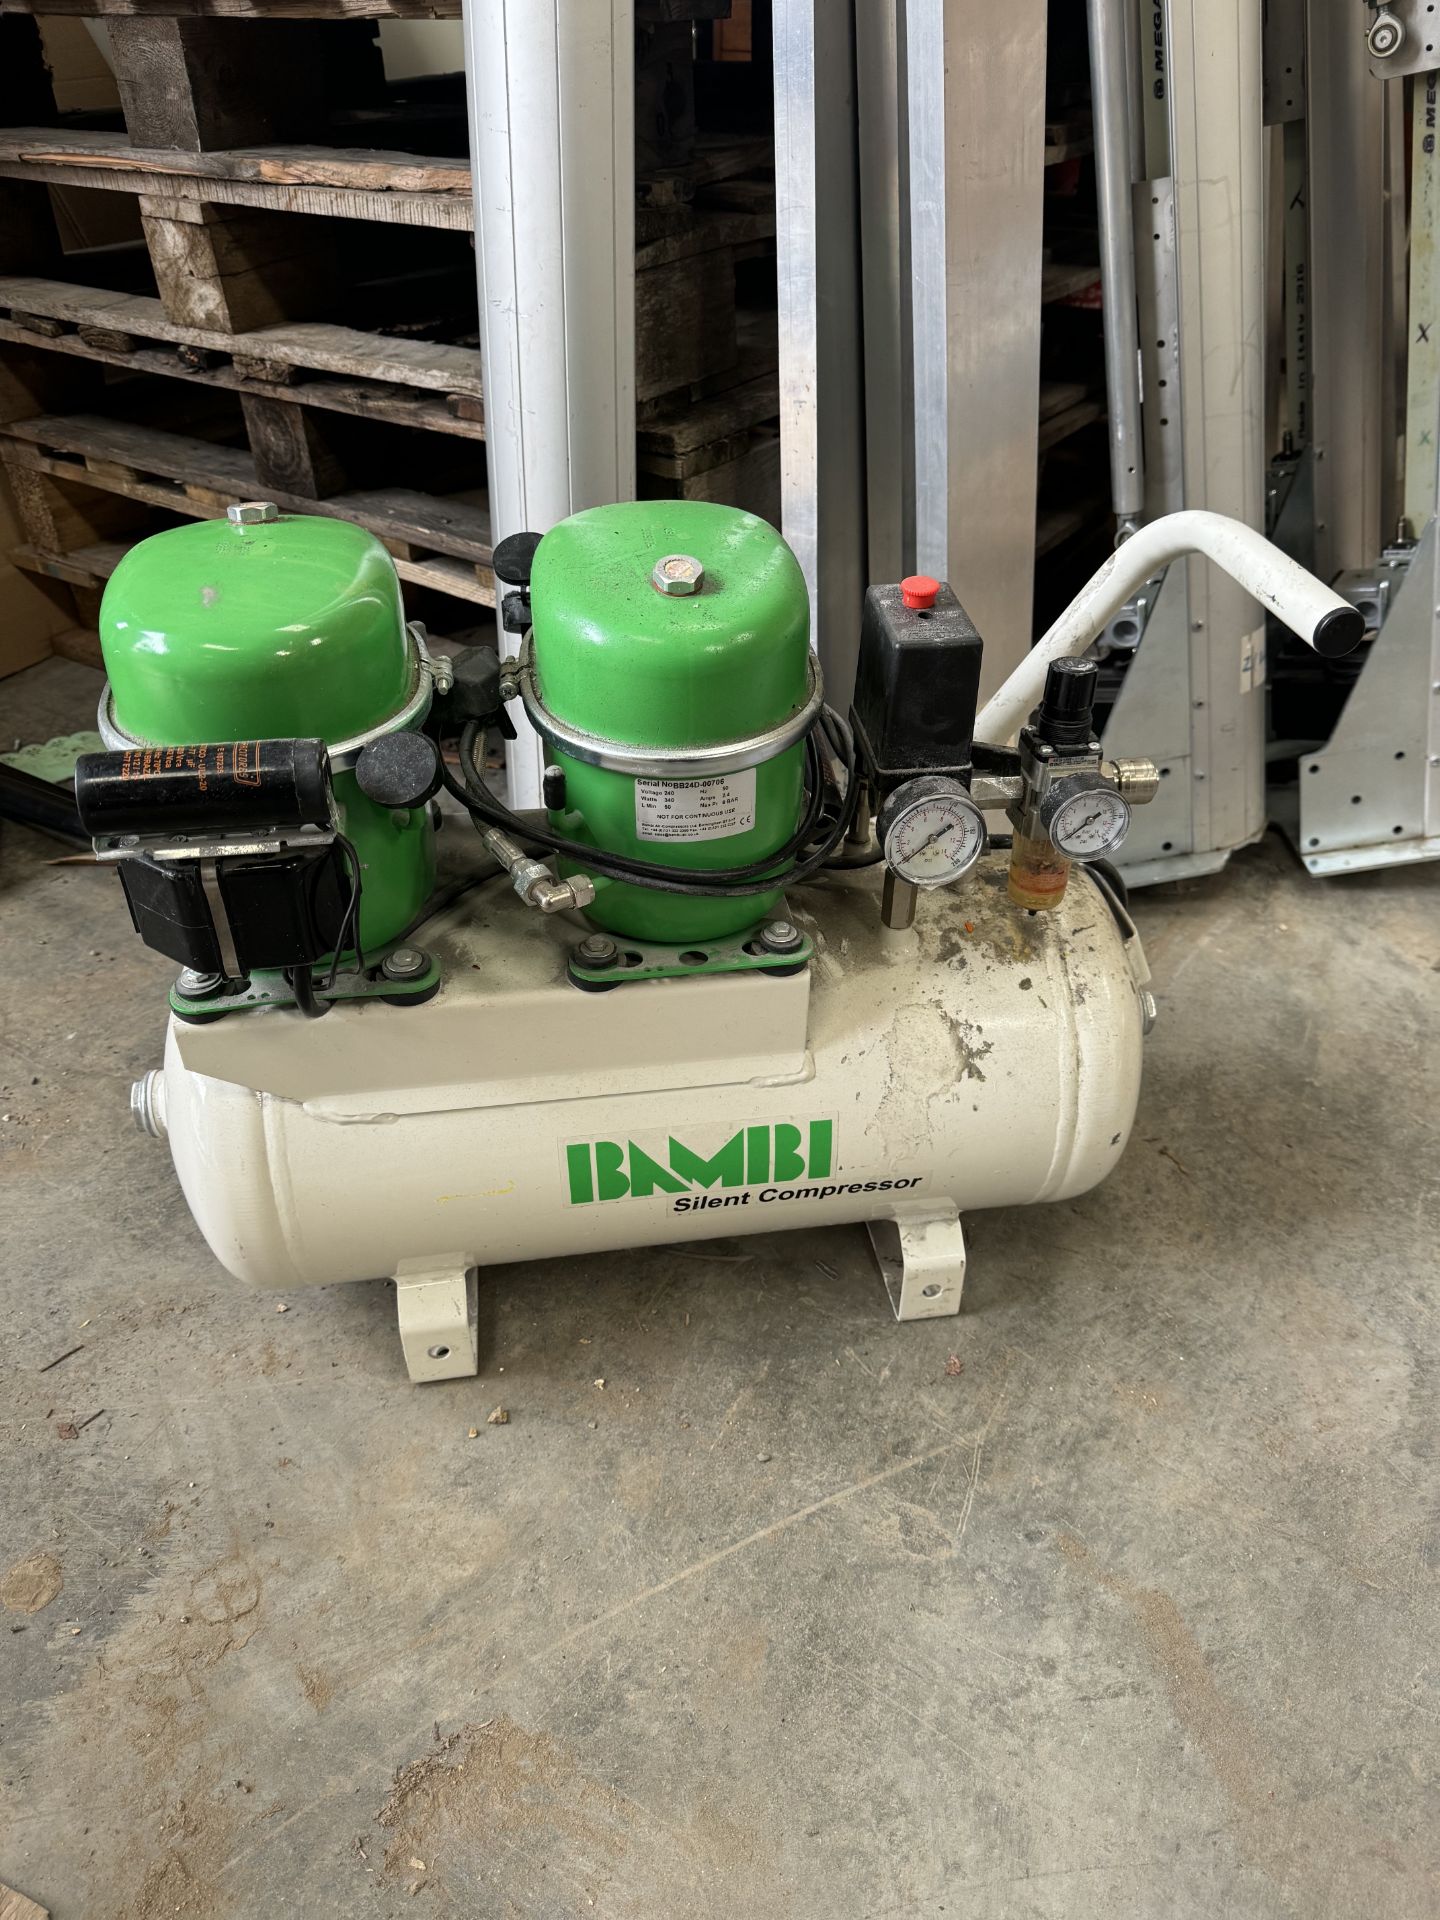 IBambi Silent compressor with metal display stand - Image 2 of 2